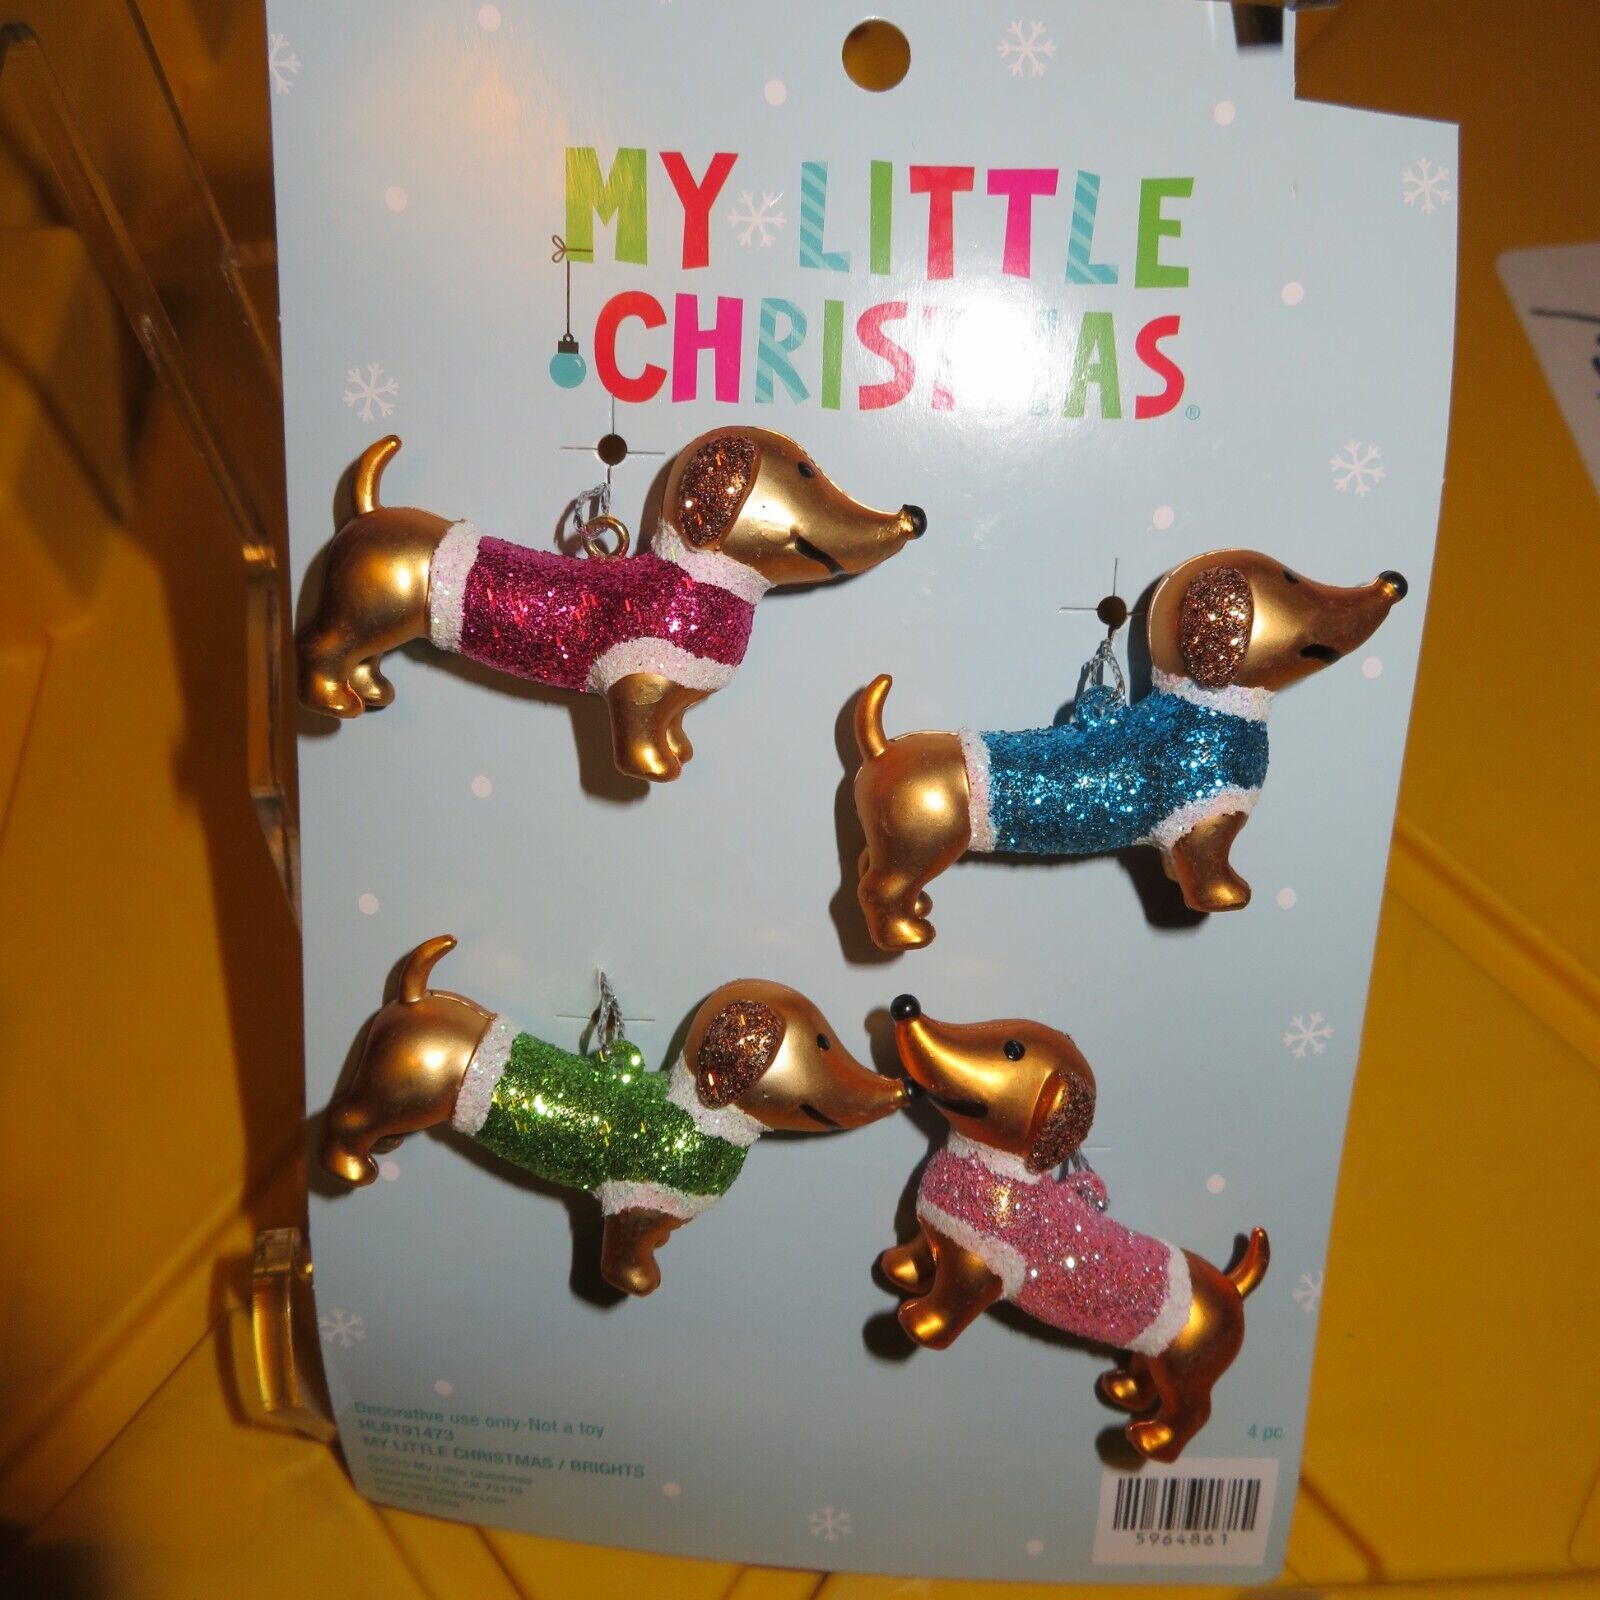 My Little Christmas Mini Dachshund Glitter Ornaments 4 Count NEW in Package